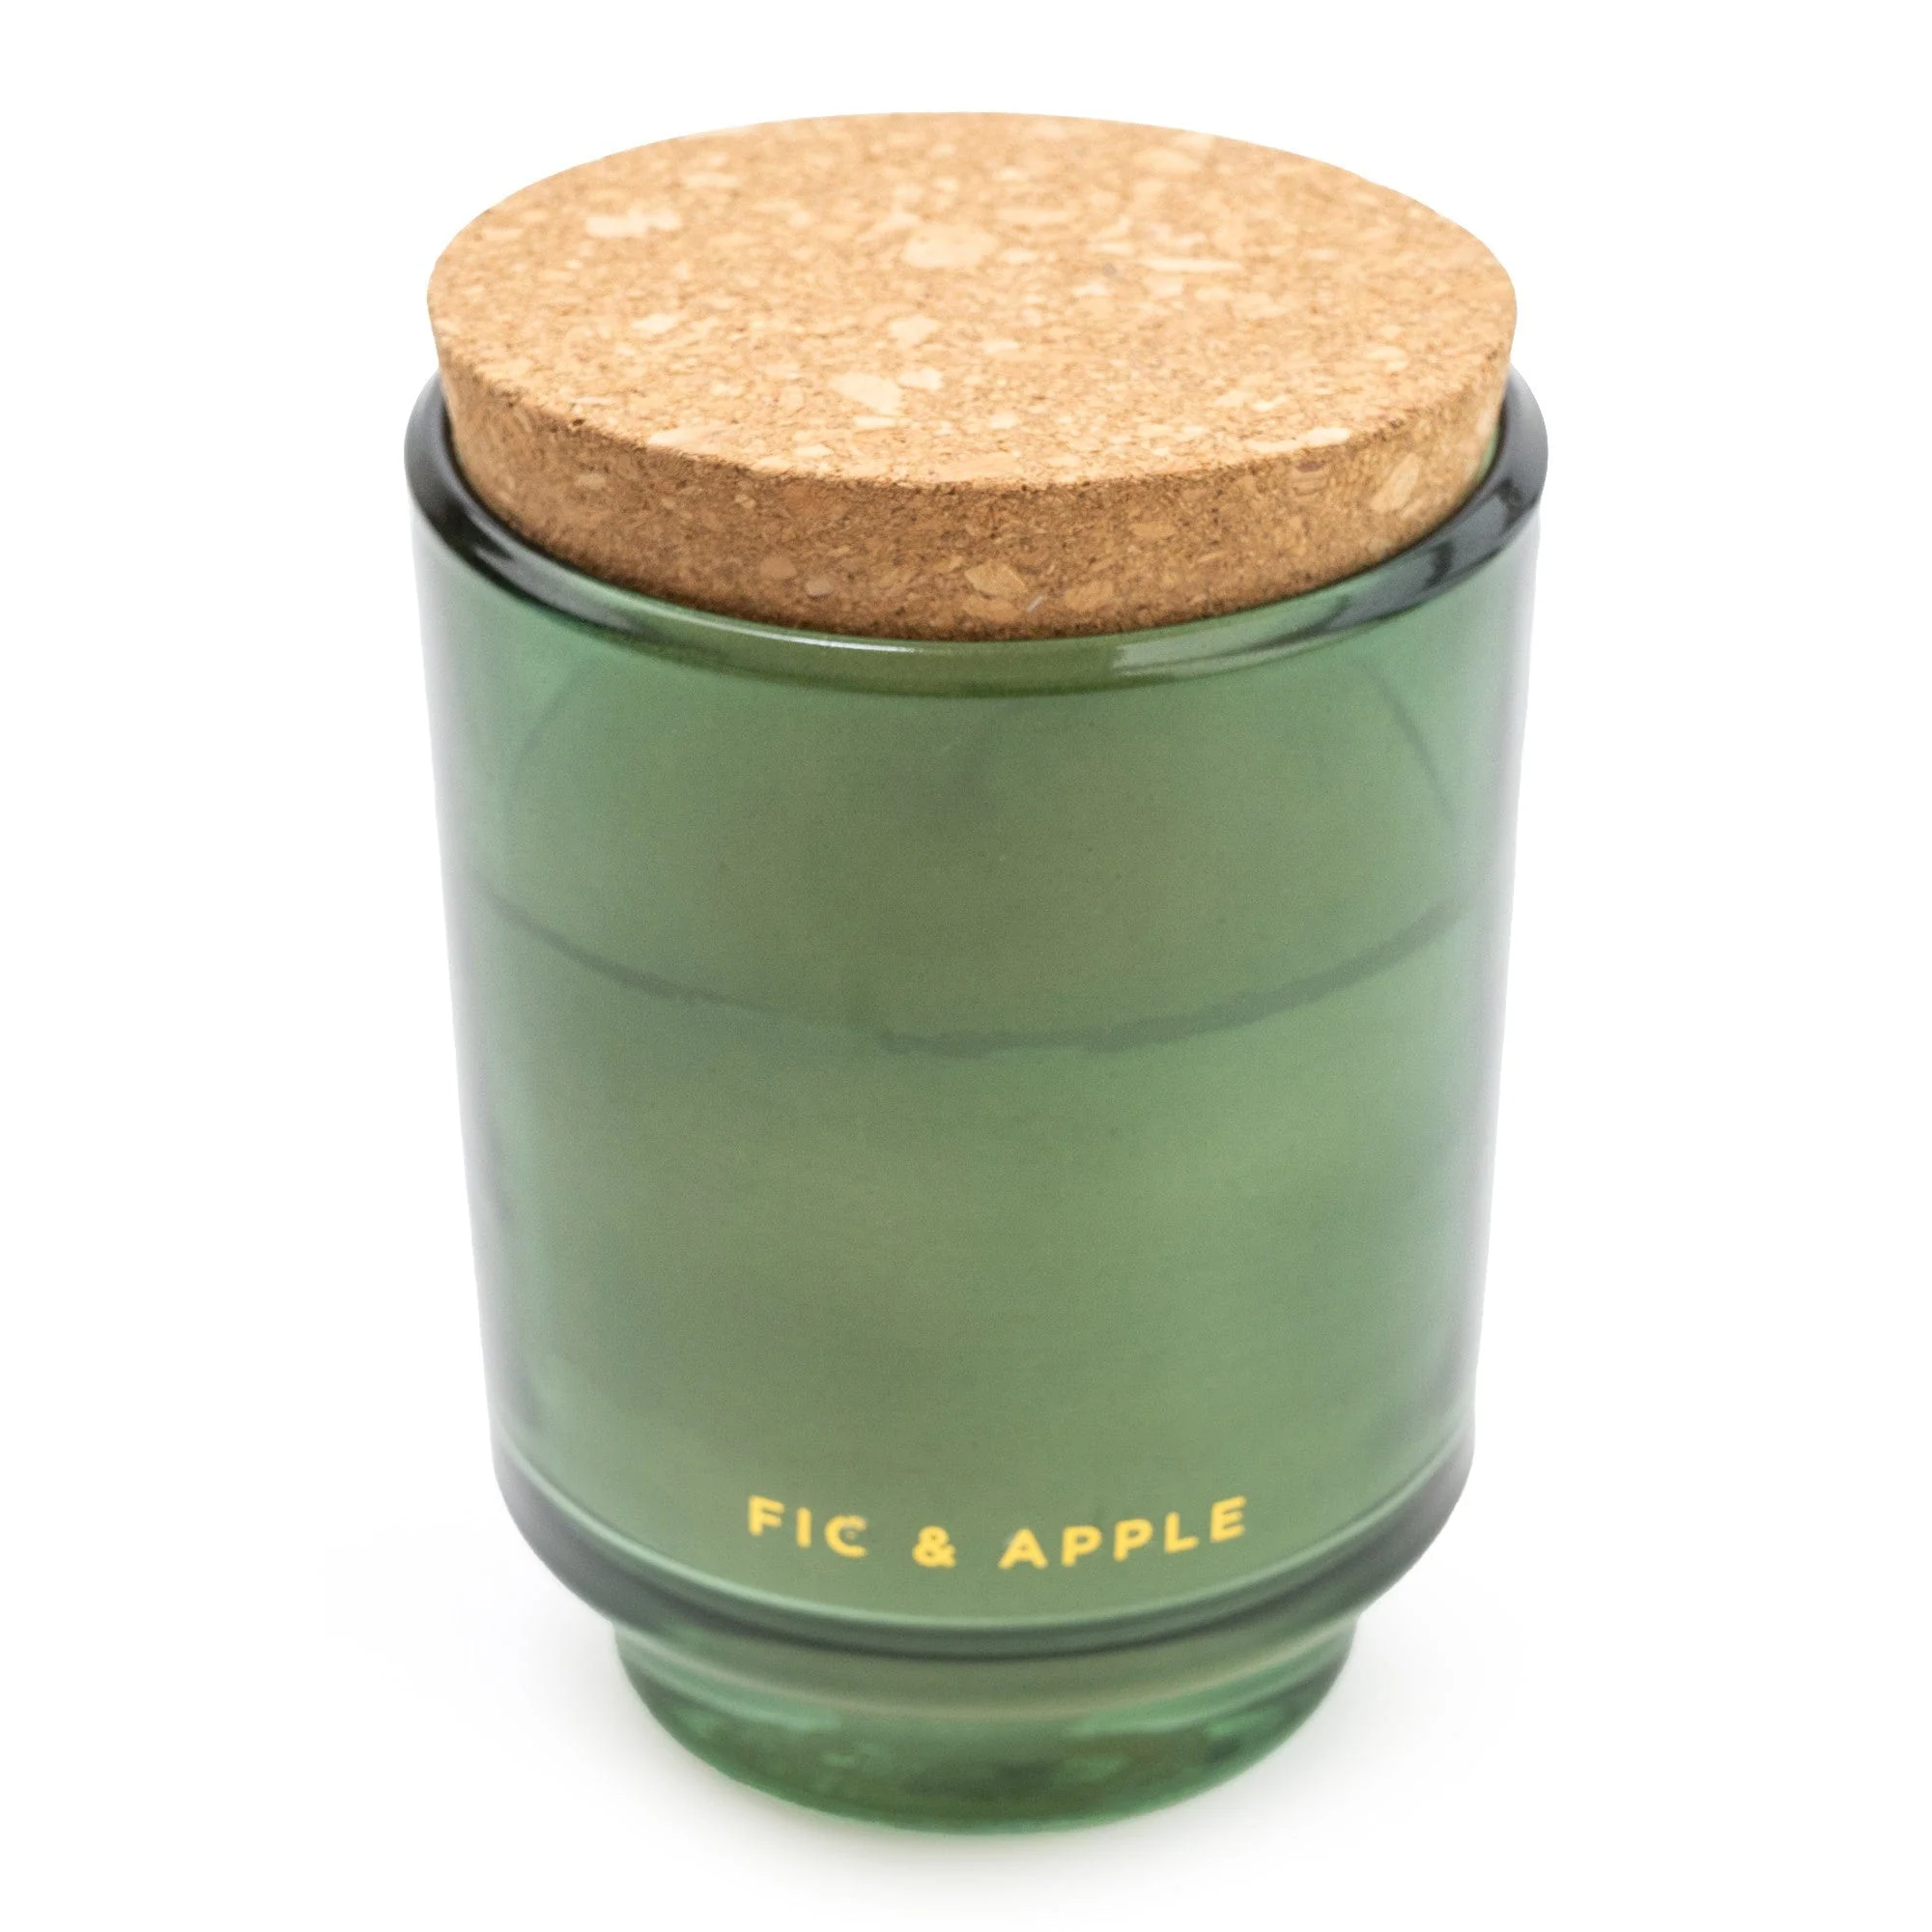 Olive Green Footed Glass Candle with Cork Lid - Fig & Apple Scent